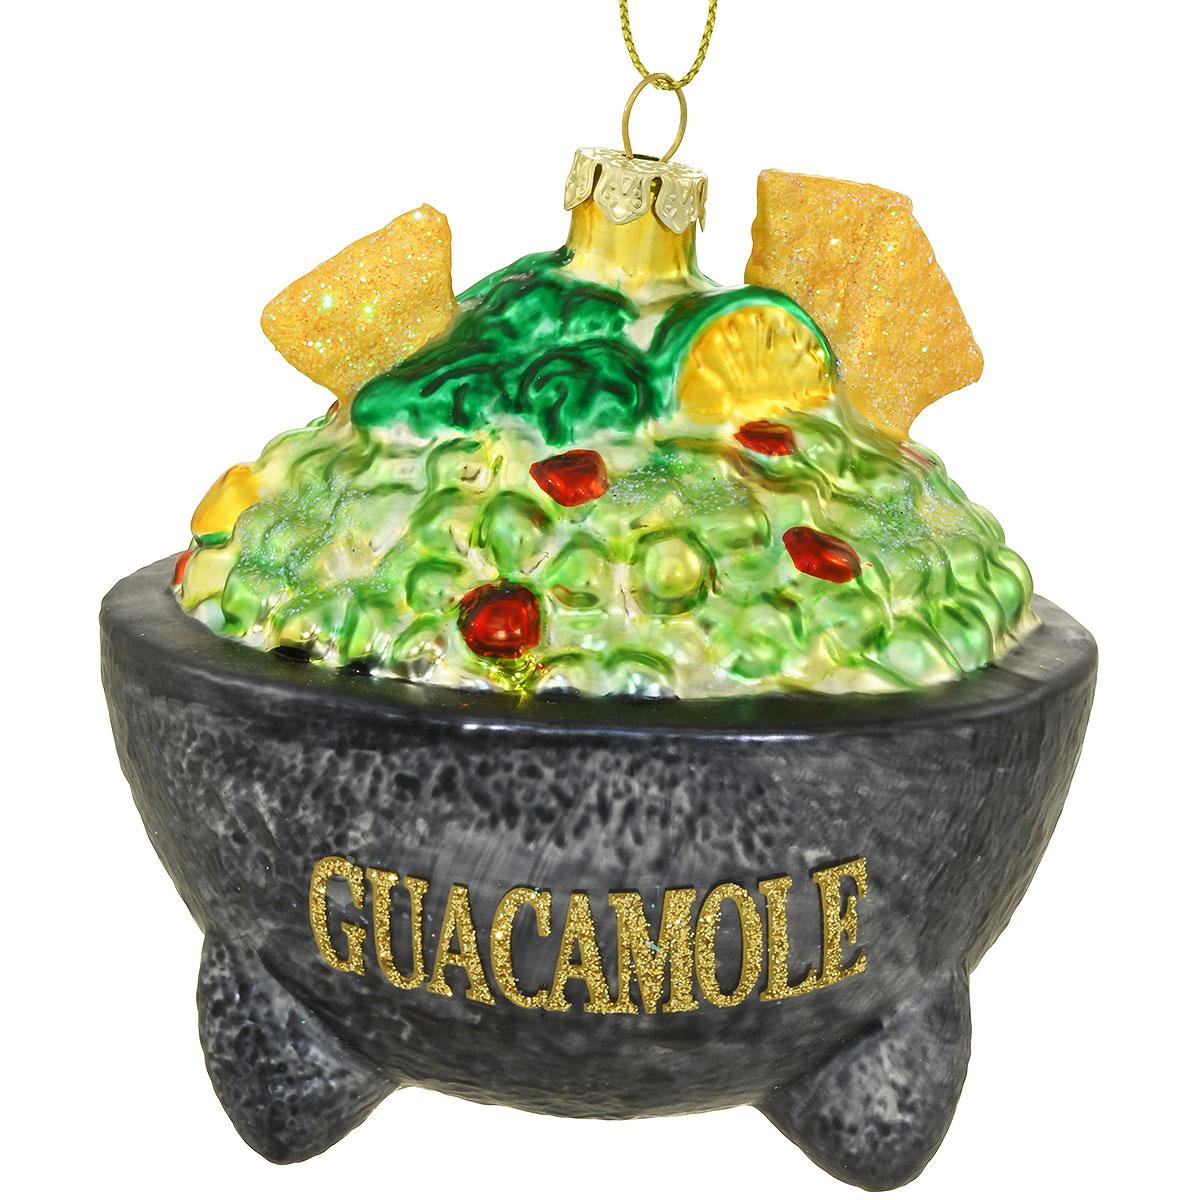 Guacamole bowl with chips glass ornament